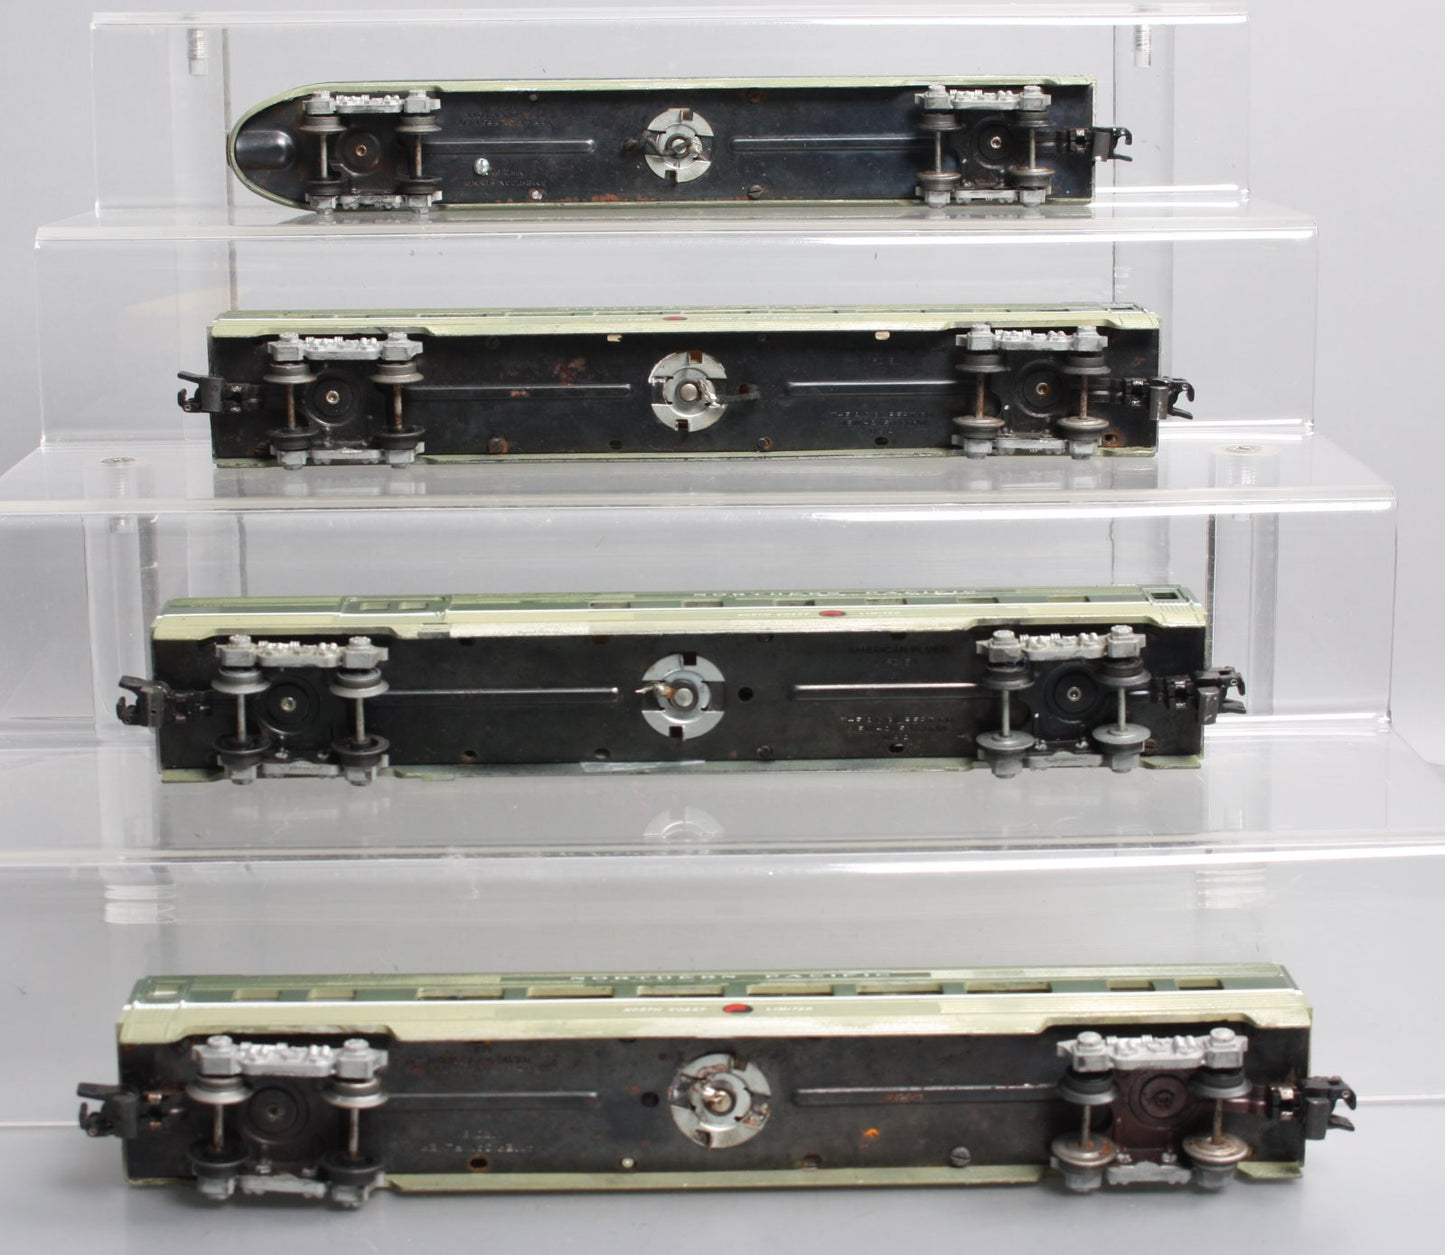 American Flyer Vintage S Assorted Northern Pacific Passenger Cars [4] VG